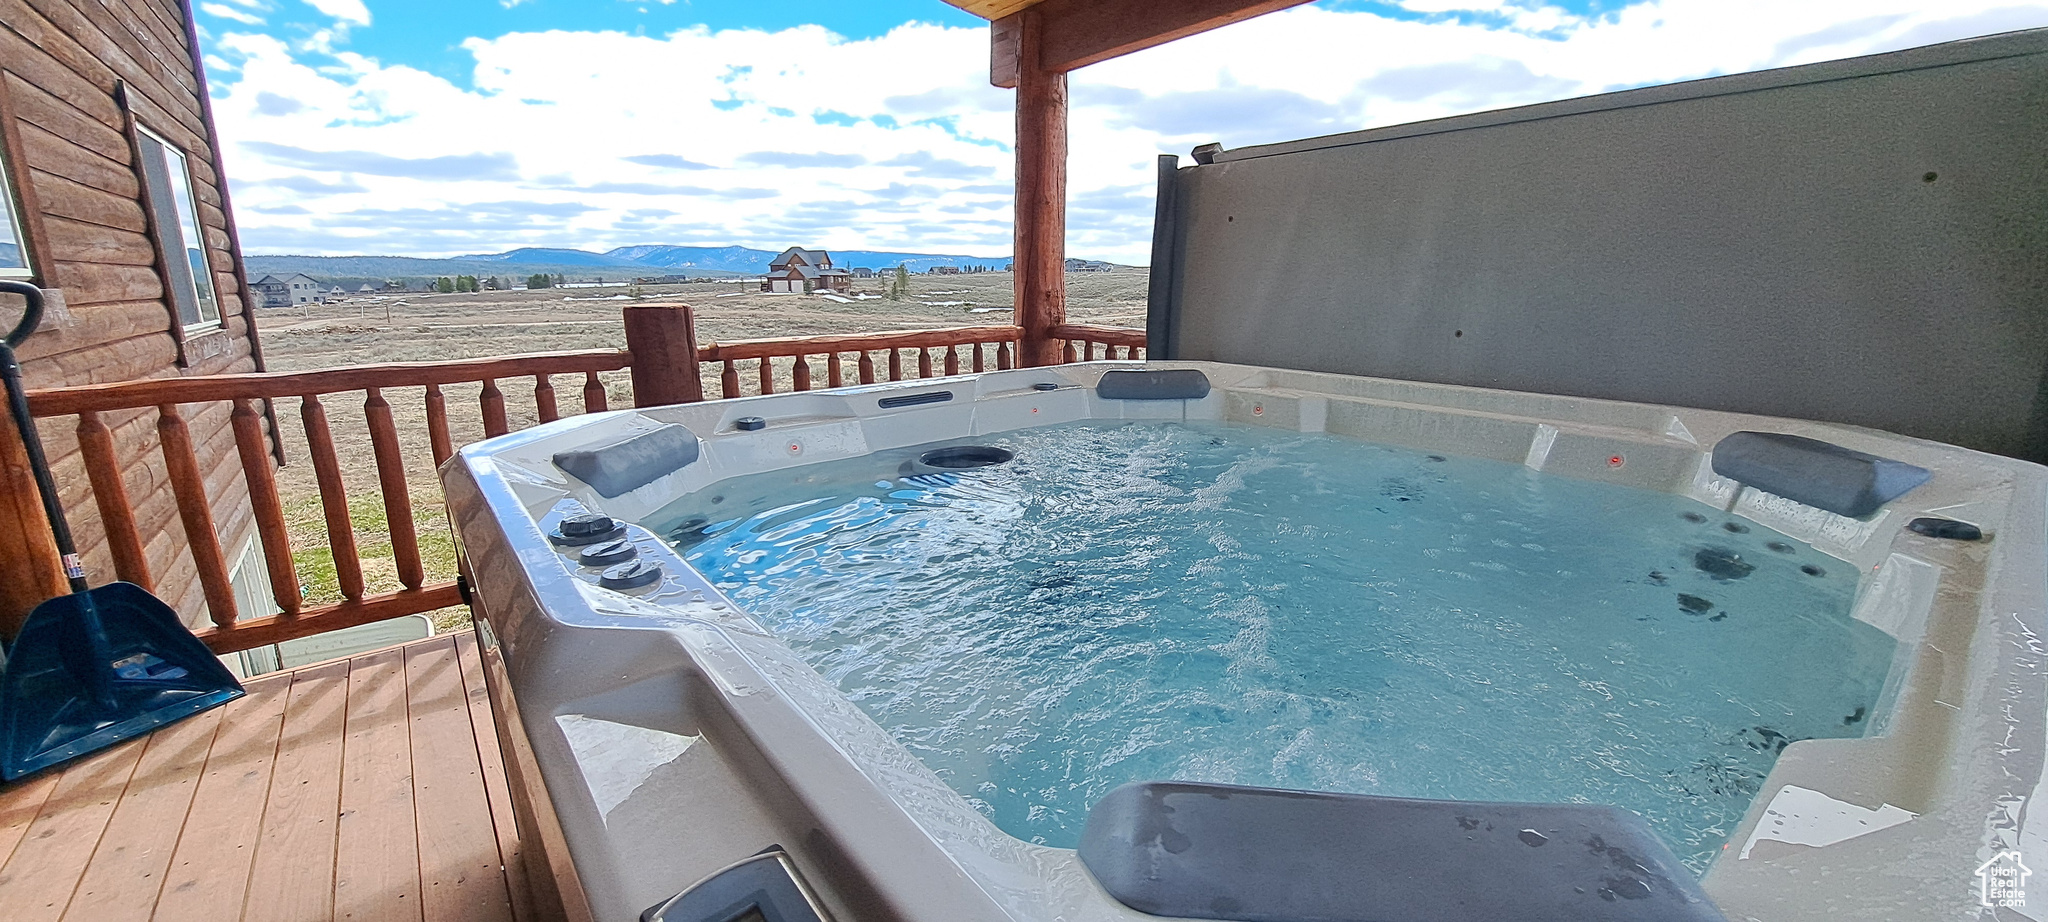 View of pool with a mountain view and an outdoor hot tub